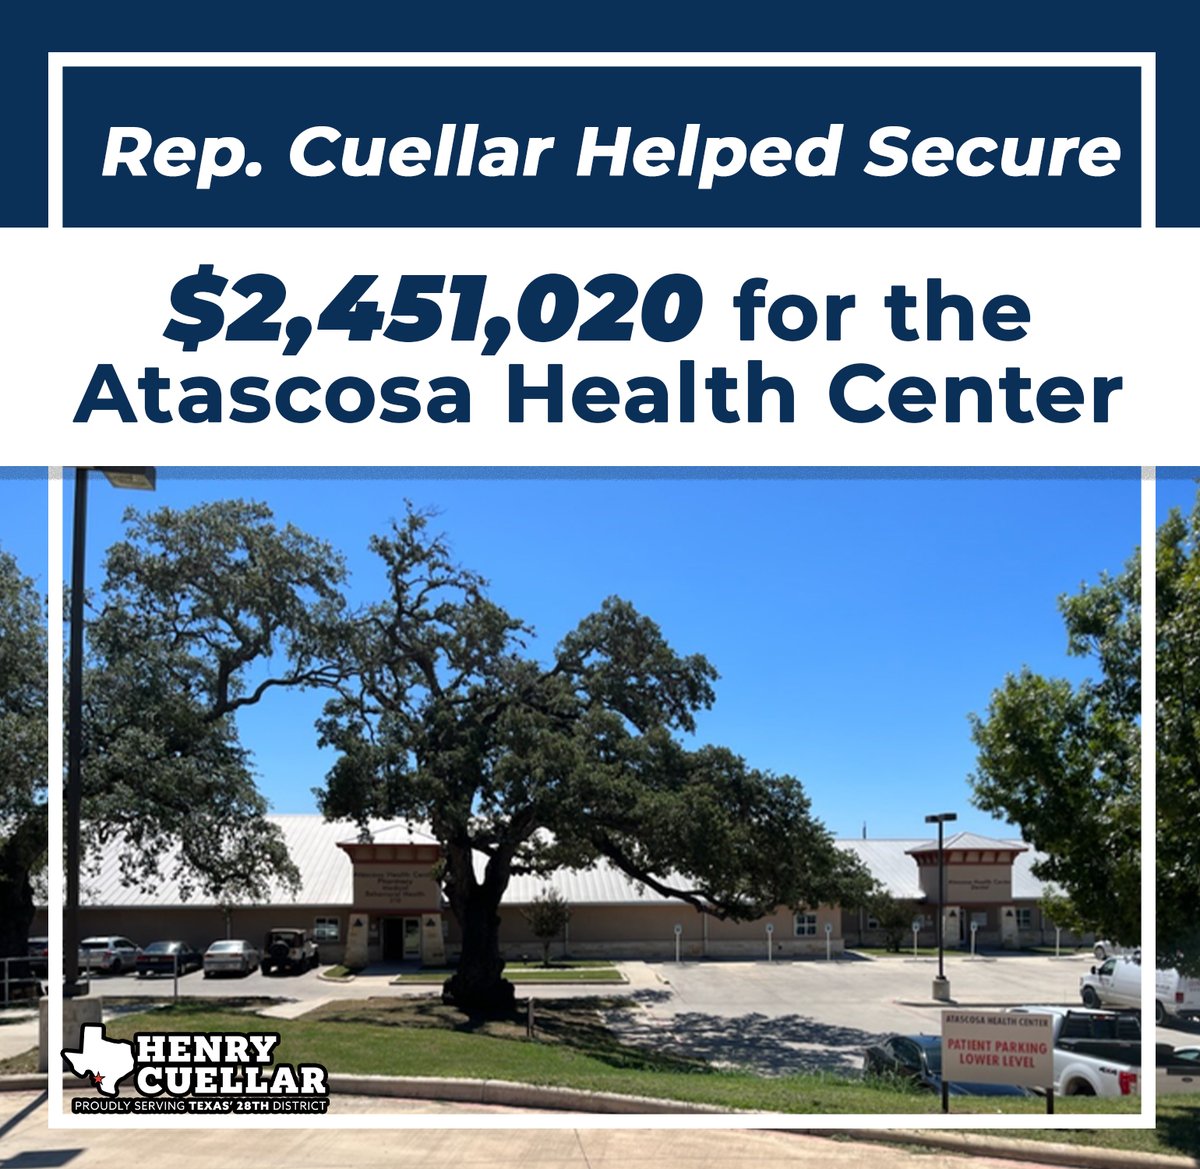 I’m pleased to announce another HHS grant today for the Atascosa Health Center in Pleasanton! @HHSGov grant funding is crucial for rural health clinics. That is why I am committed to protecting rural healthcare funding and expanding healthcare access across South Texas.